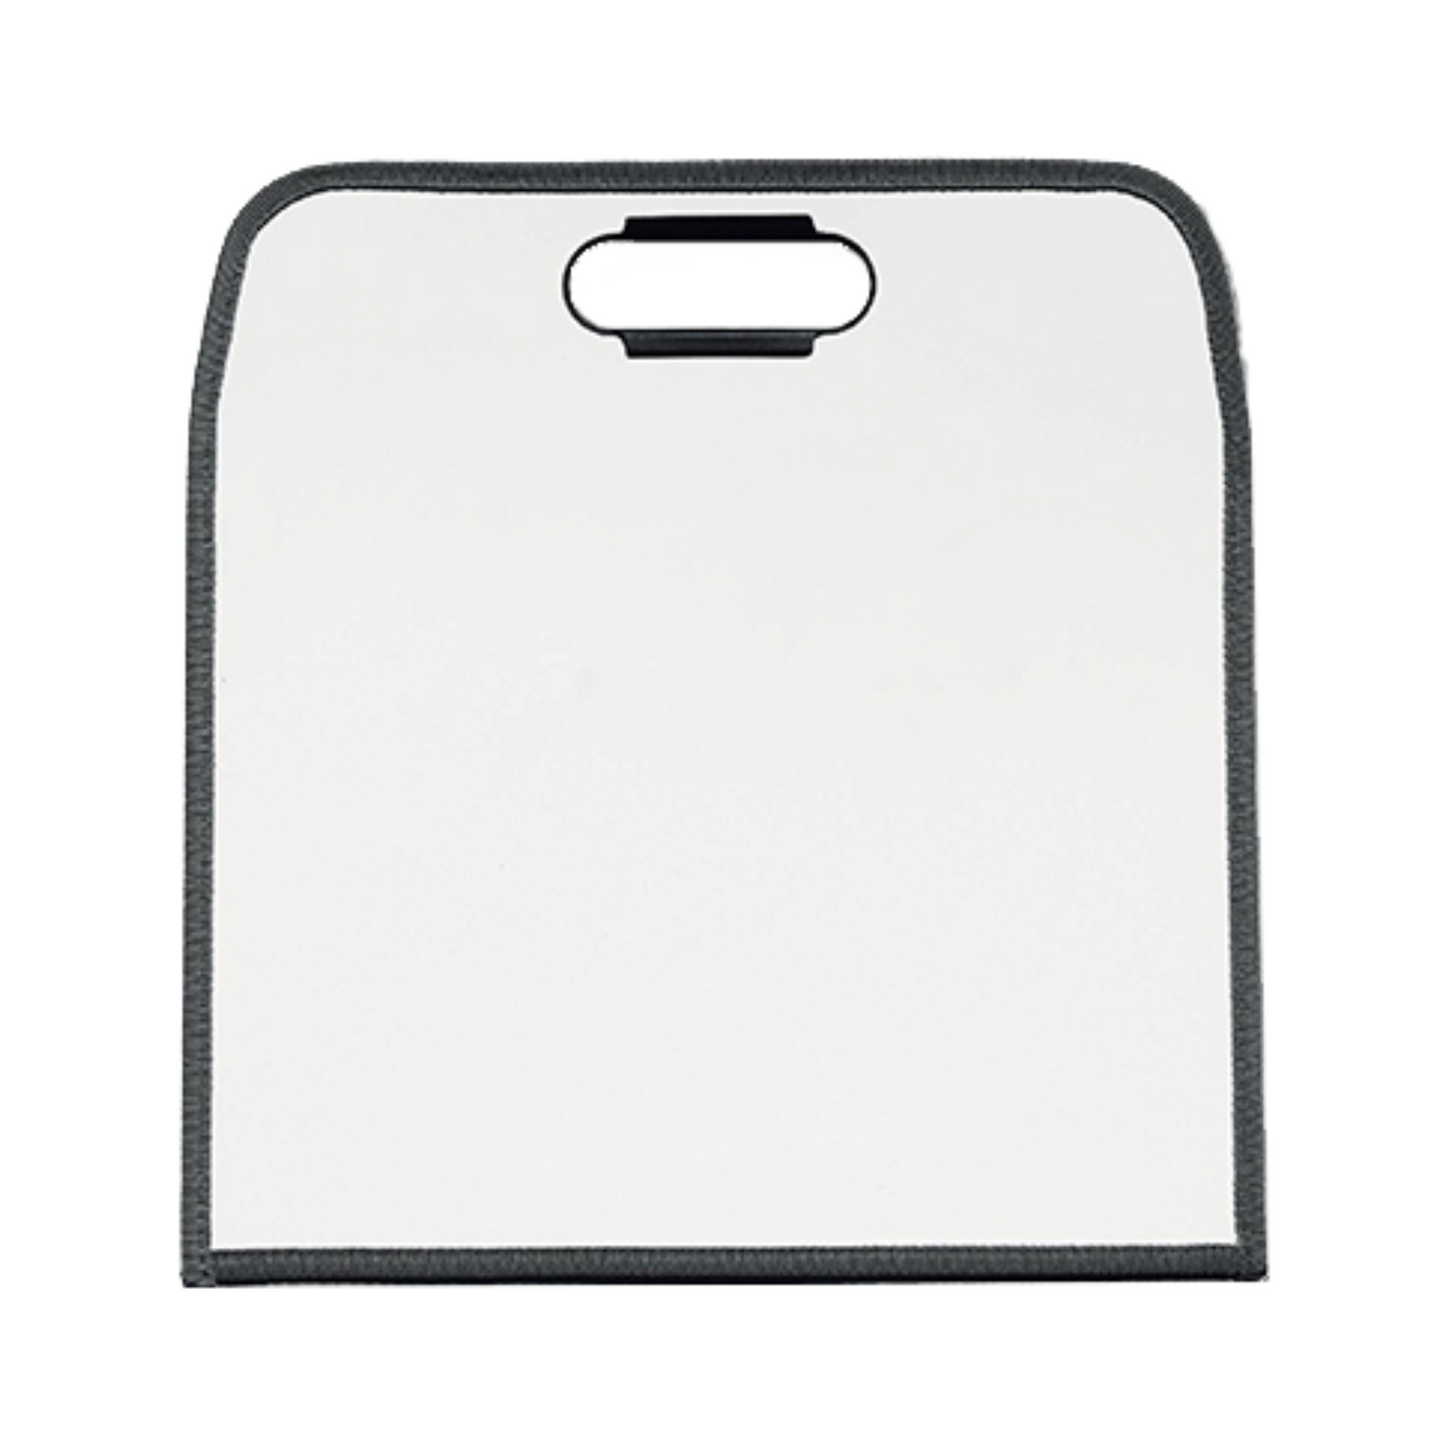 Blank dry-erase surface of the dry erase pad, with a sleek black carry handle on top, featuring a broad white writing surface and black binding around the edge. Ideal for presentations, note-taking, or educational activities on the go.